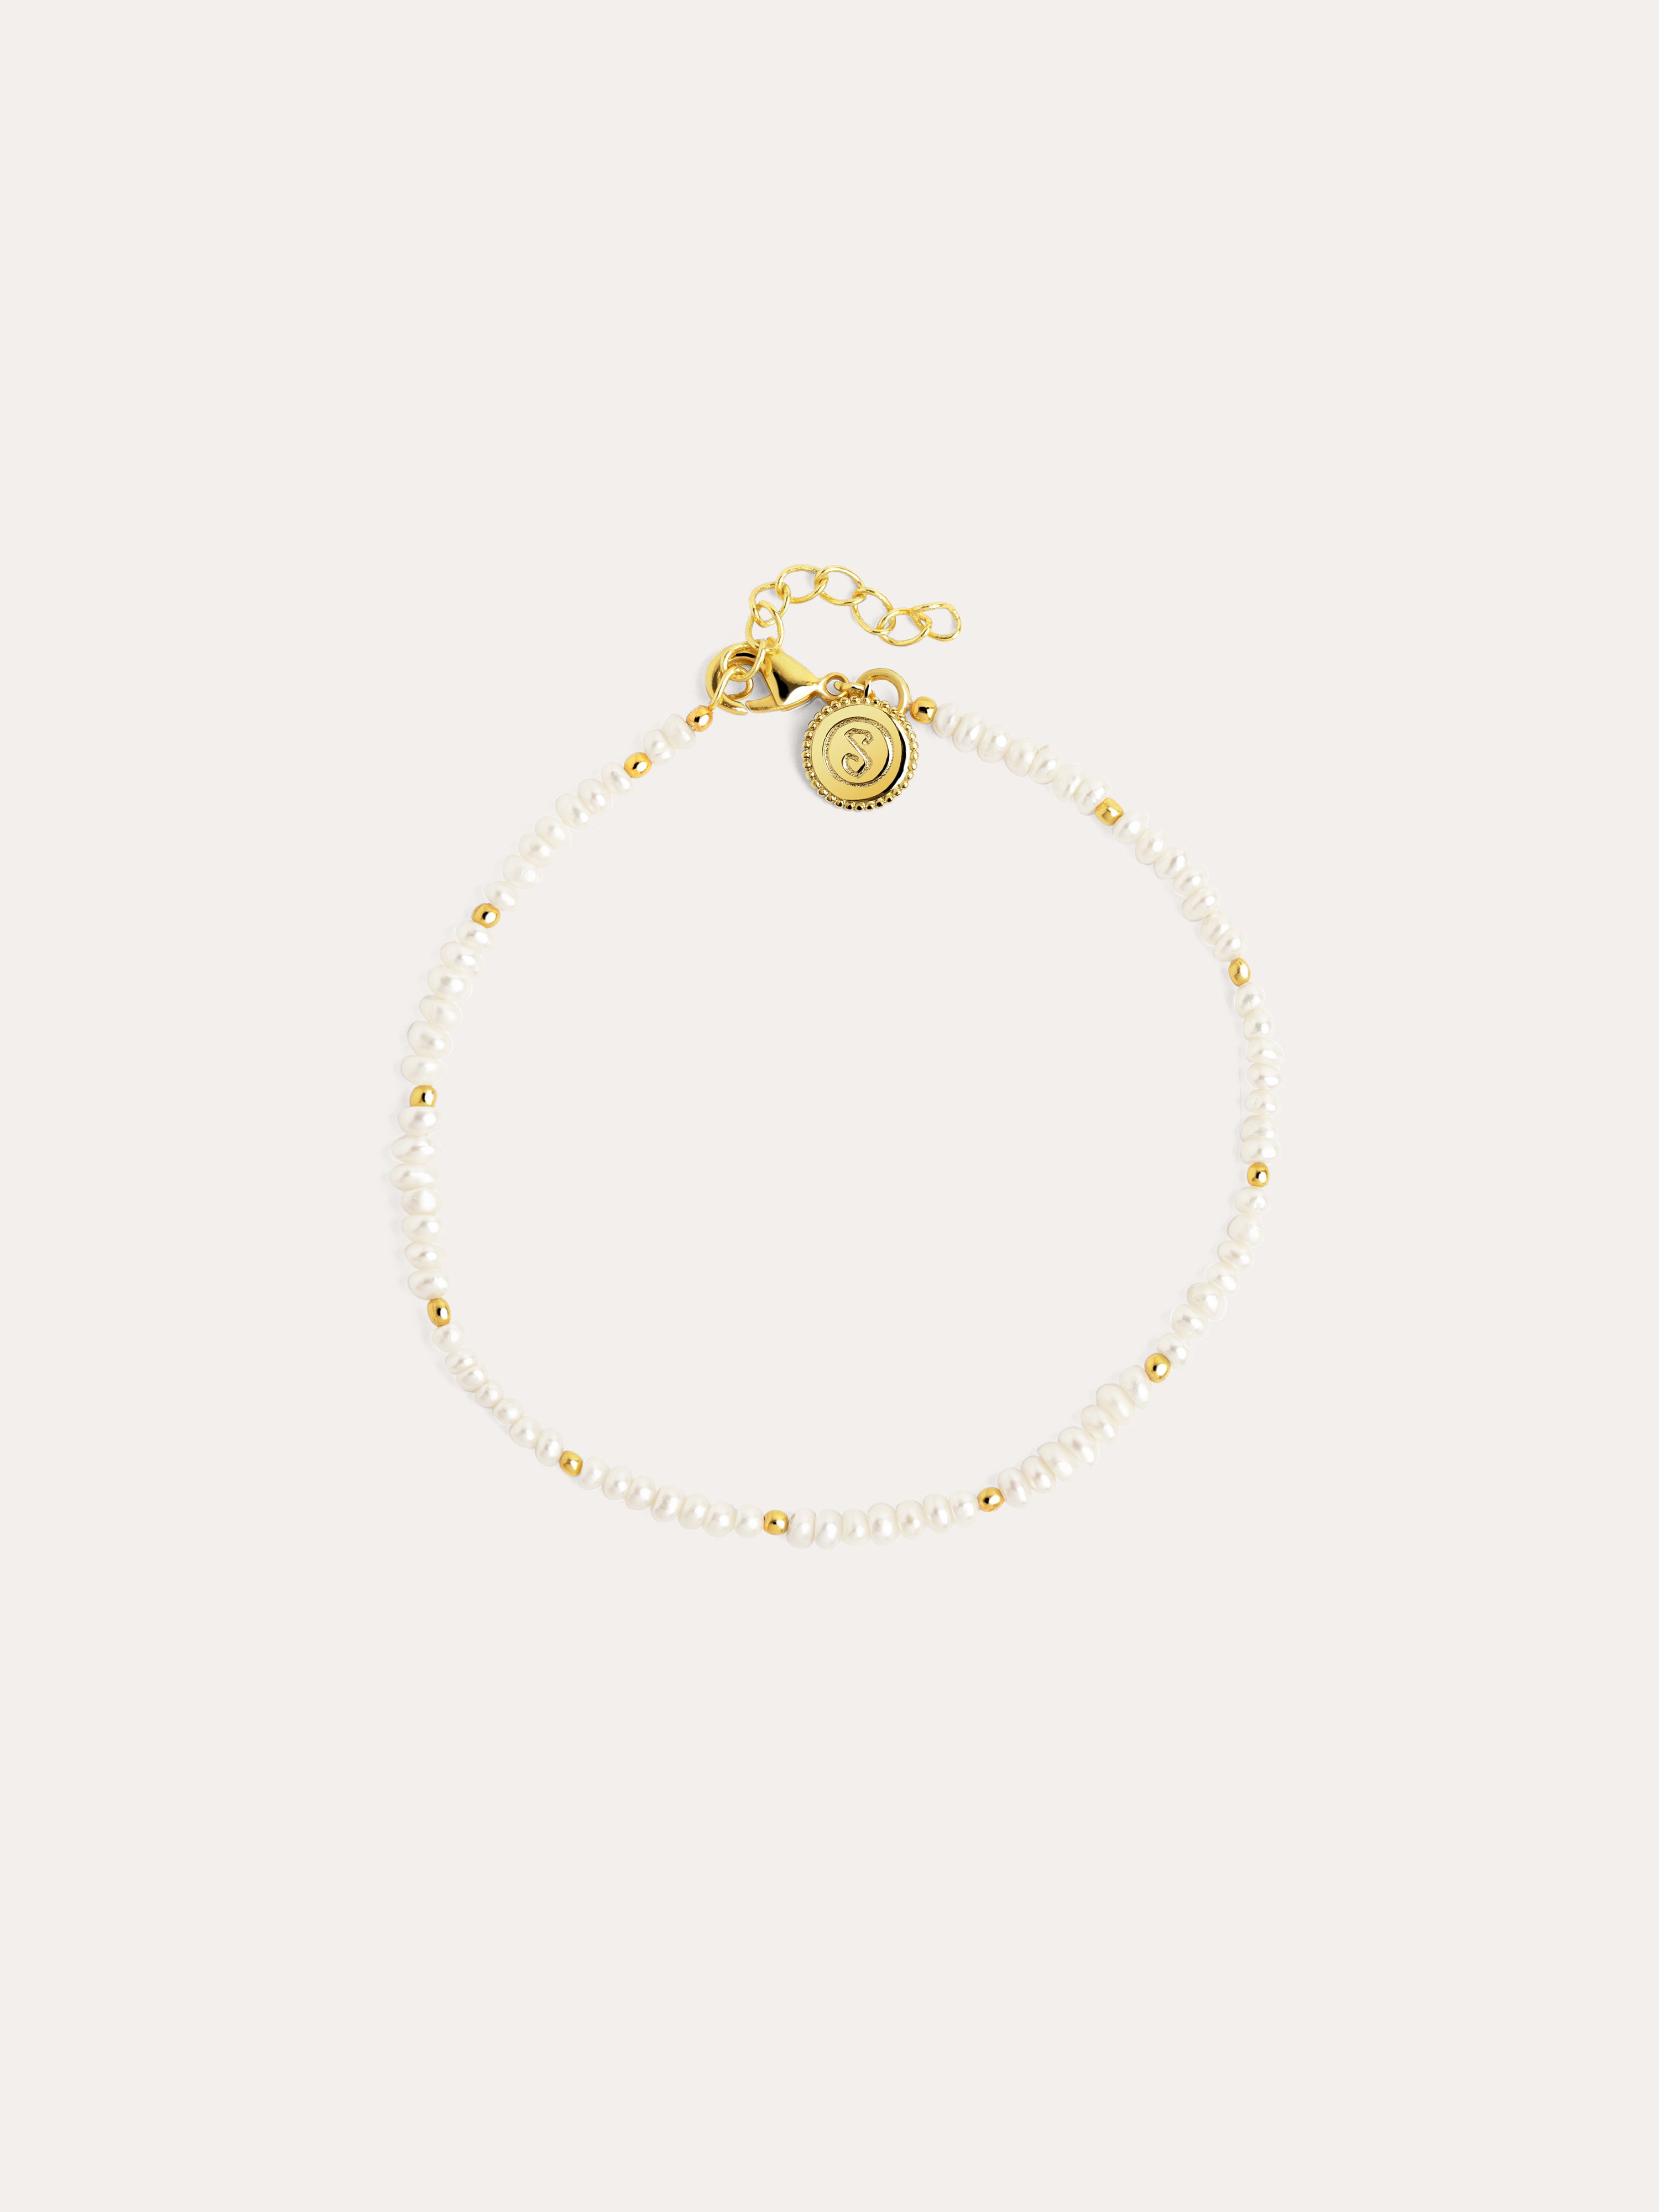 Pearls Dots Stainless Steel Gold Bracelet